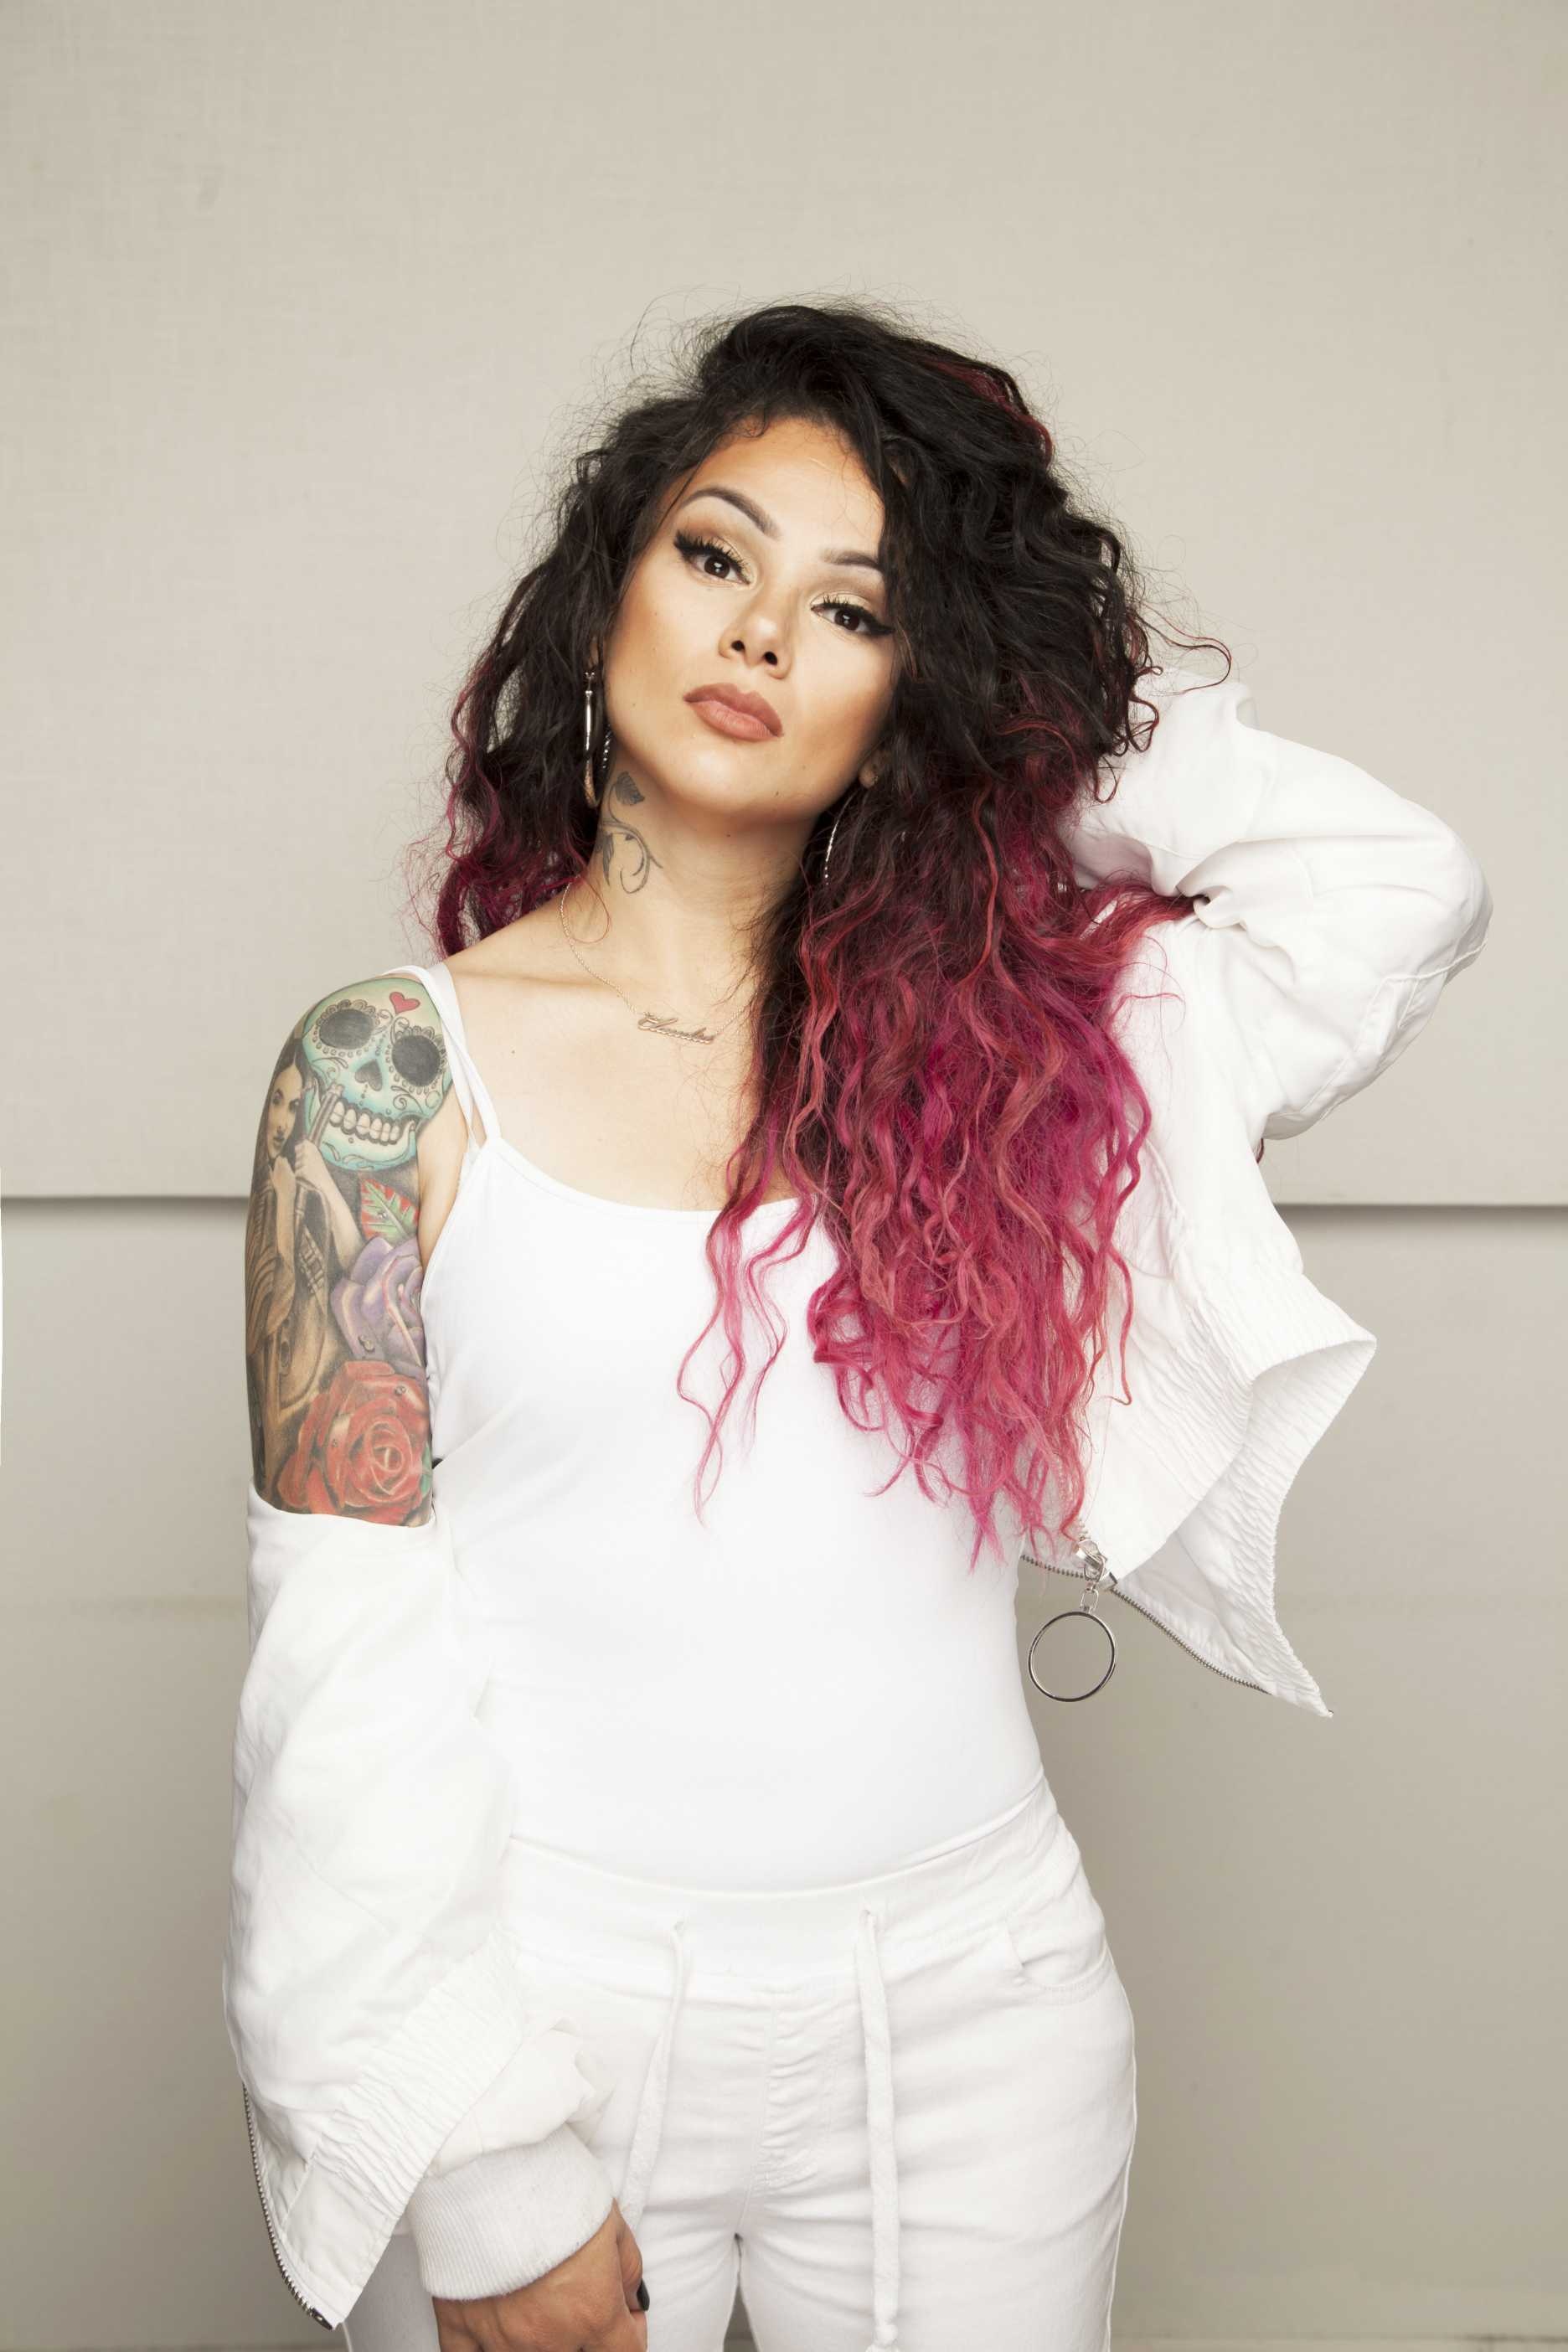 Snow Tha Product's pool party, Hollywood Times event, Energetic music, Party vibes, 1880x2810 HD Handy